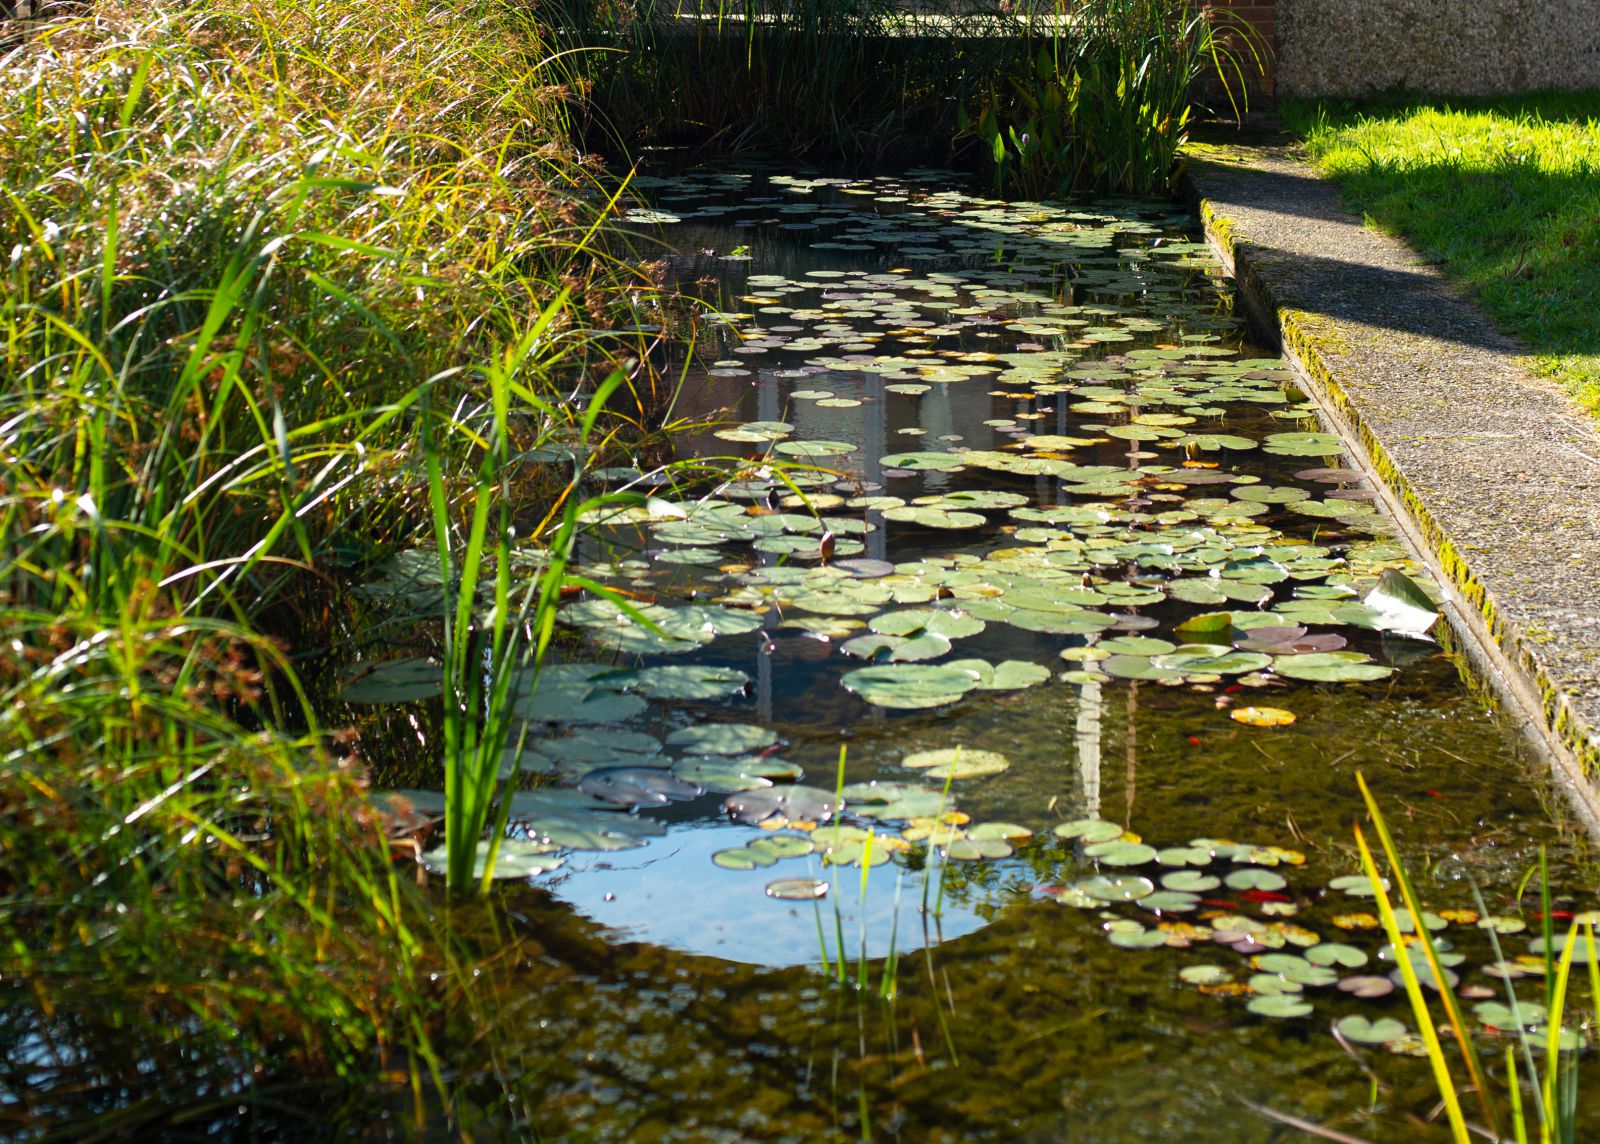 Image of pond outside Arts building with water lillies and grasses